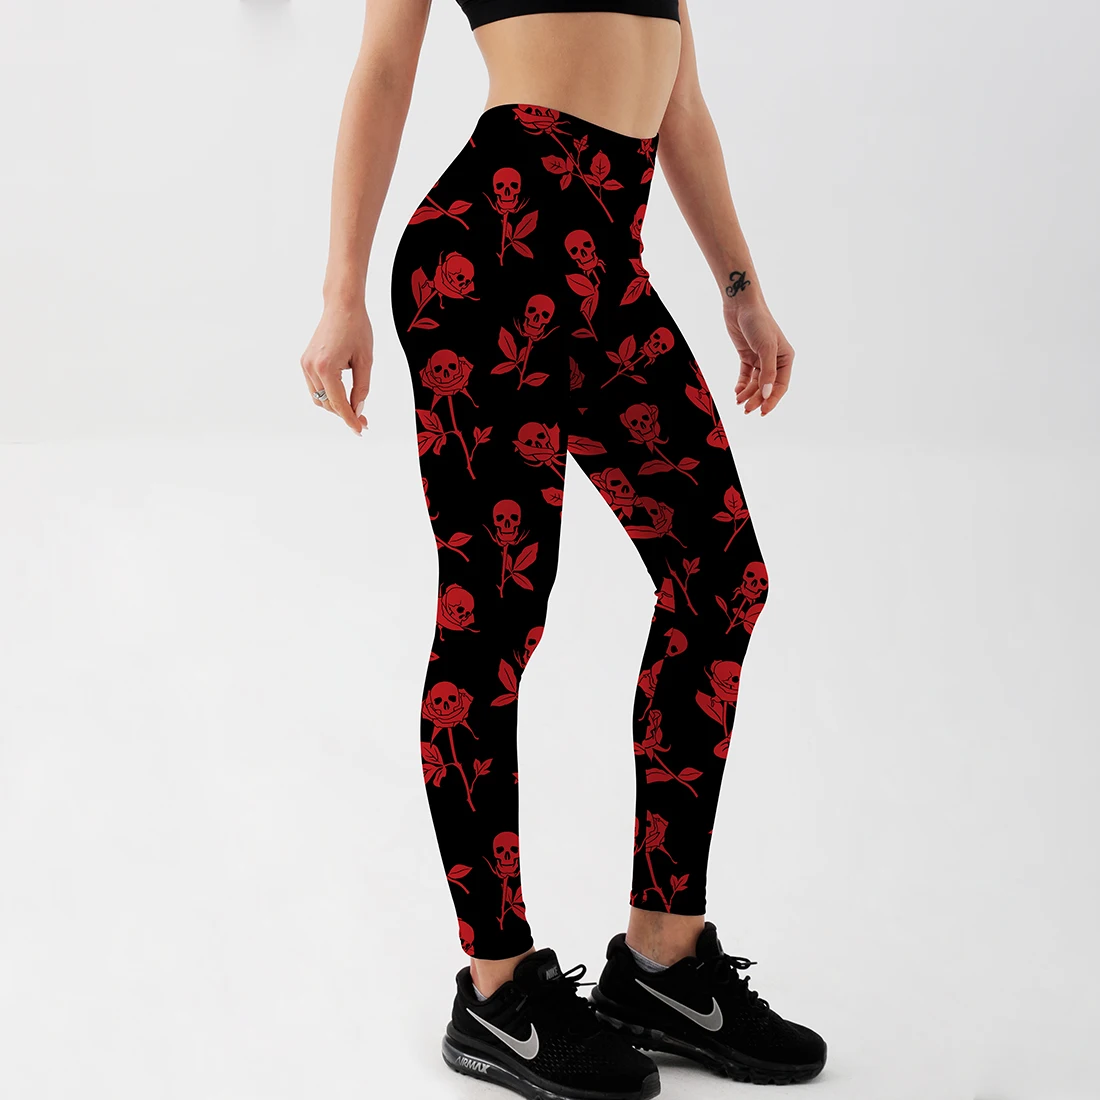 Sexy Fitness Women Gym Leggings Push Up High Waist Red Rose skull printed Workout Slim Leggins Fashion Casual Mujer Pants